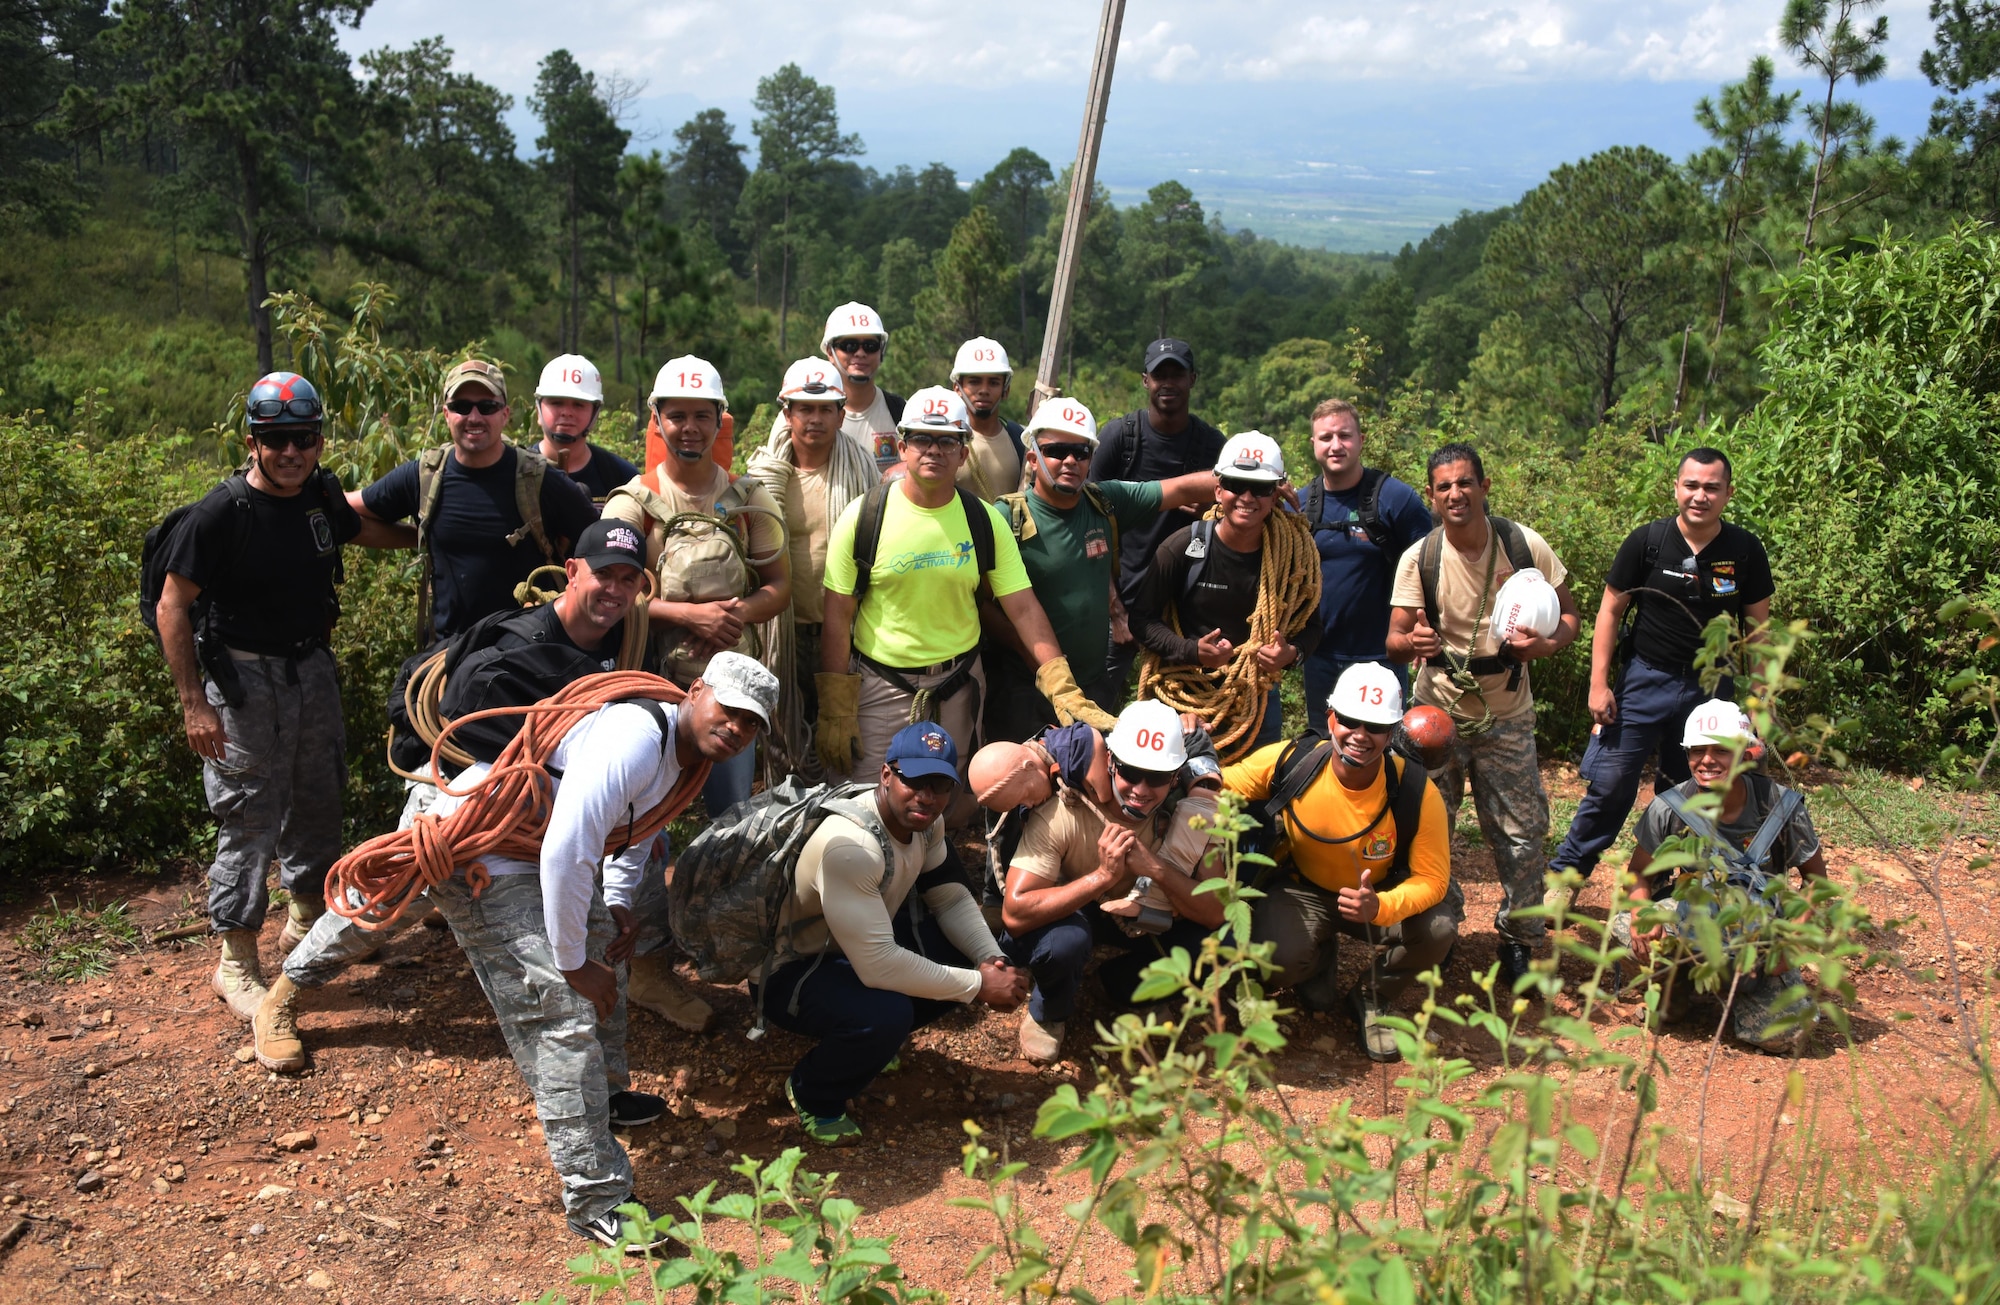 Thirteen Honduran PUMCIR (Personal Utilizado en Misiones Contra Incendio y Rescate – Personnel Used in Fire and Rescue) volunteers and six U.S. Air Force Airmen assigned to Joint Task Force-Bravo who included firefighters and Personnel Recovery Coordination Cell members, led by Herberth Gaekel (left), 612th Air Base Squadron Fire Department liaison at Soto Cano Air Base, Honduras, and PUMCIR founder and instructor, pose for a photo midway through a three-mile hike up to a cave located in Comayagua National Park near El Volcan, Honduras, Sept. 24, 2016, to conduct search and rescue training. Gaekel seeks to involve U.S. service members in order to provide them an opportunity to share with and learn from their Honduran counterparts as well as to encourage positive relationship building between the two nations. Gaekel said the training he provides significantly augments what training the volunteers, who are also often full or part-time Bomberos, already receive, and in many cases would not receive if not for his program. (U.S. Air Force photo by Capt. David Liapis) 